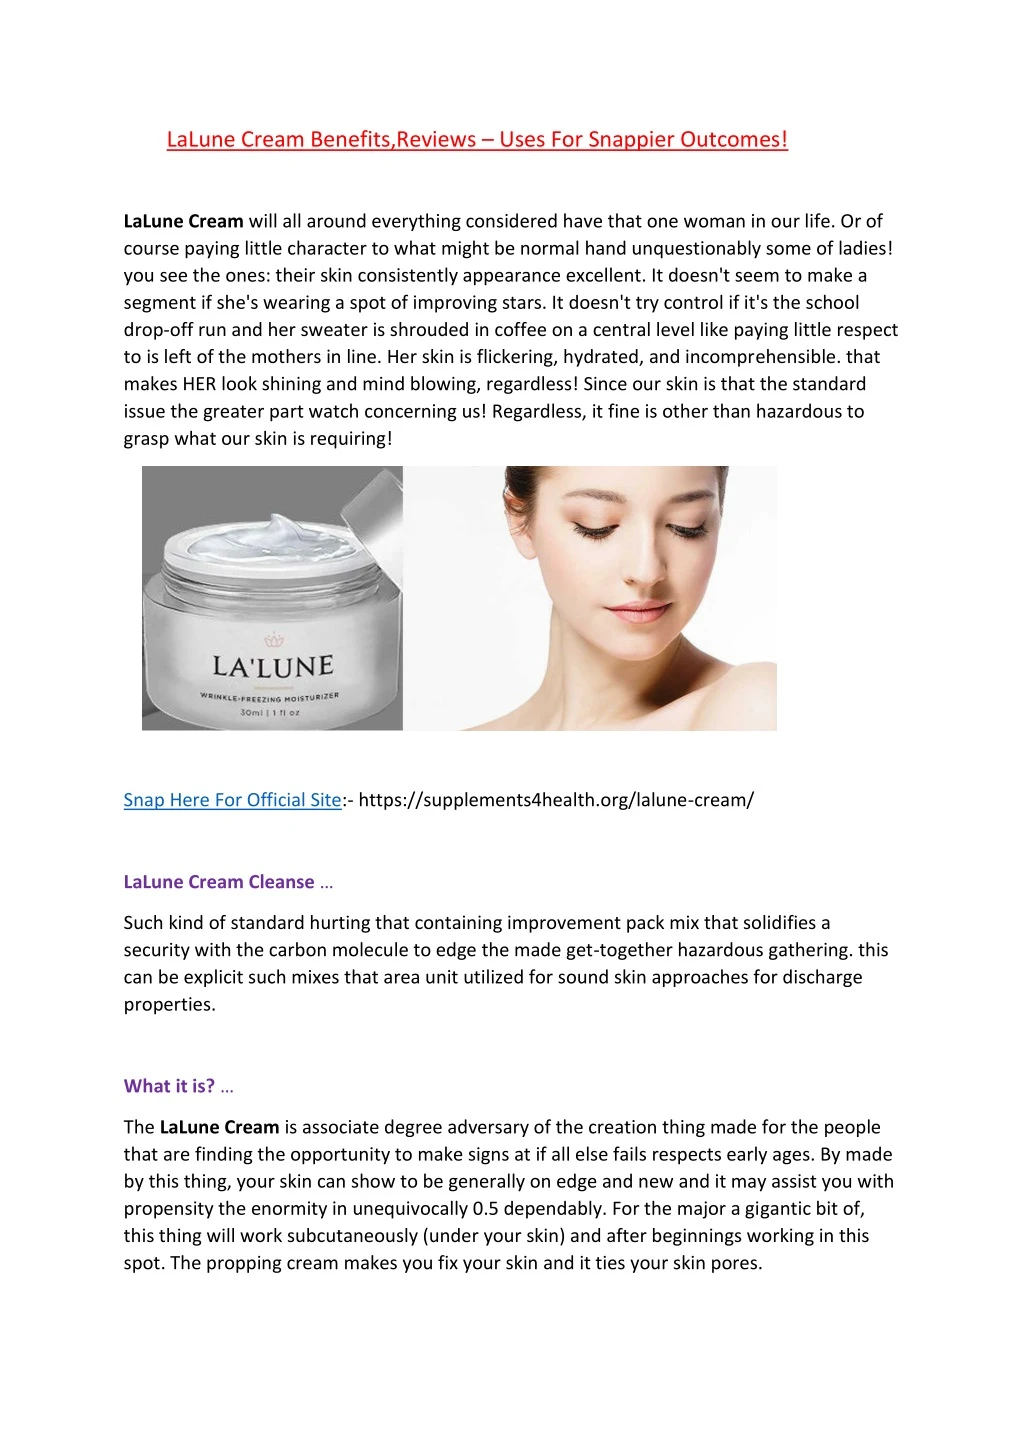 lalune cream benefits reviews uses for snappier